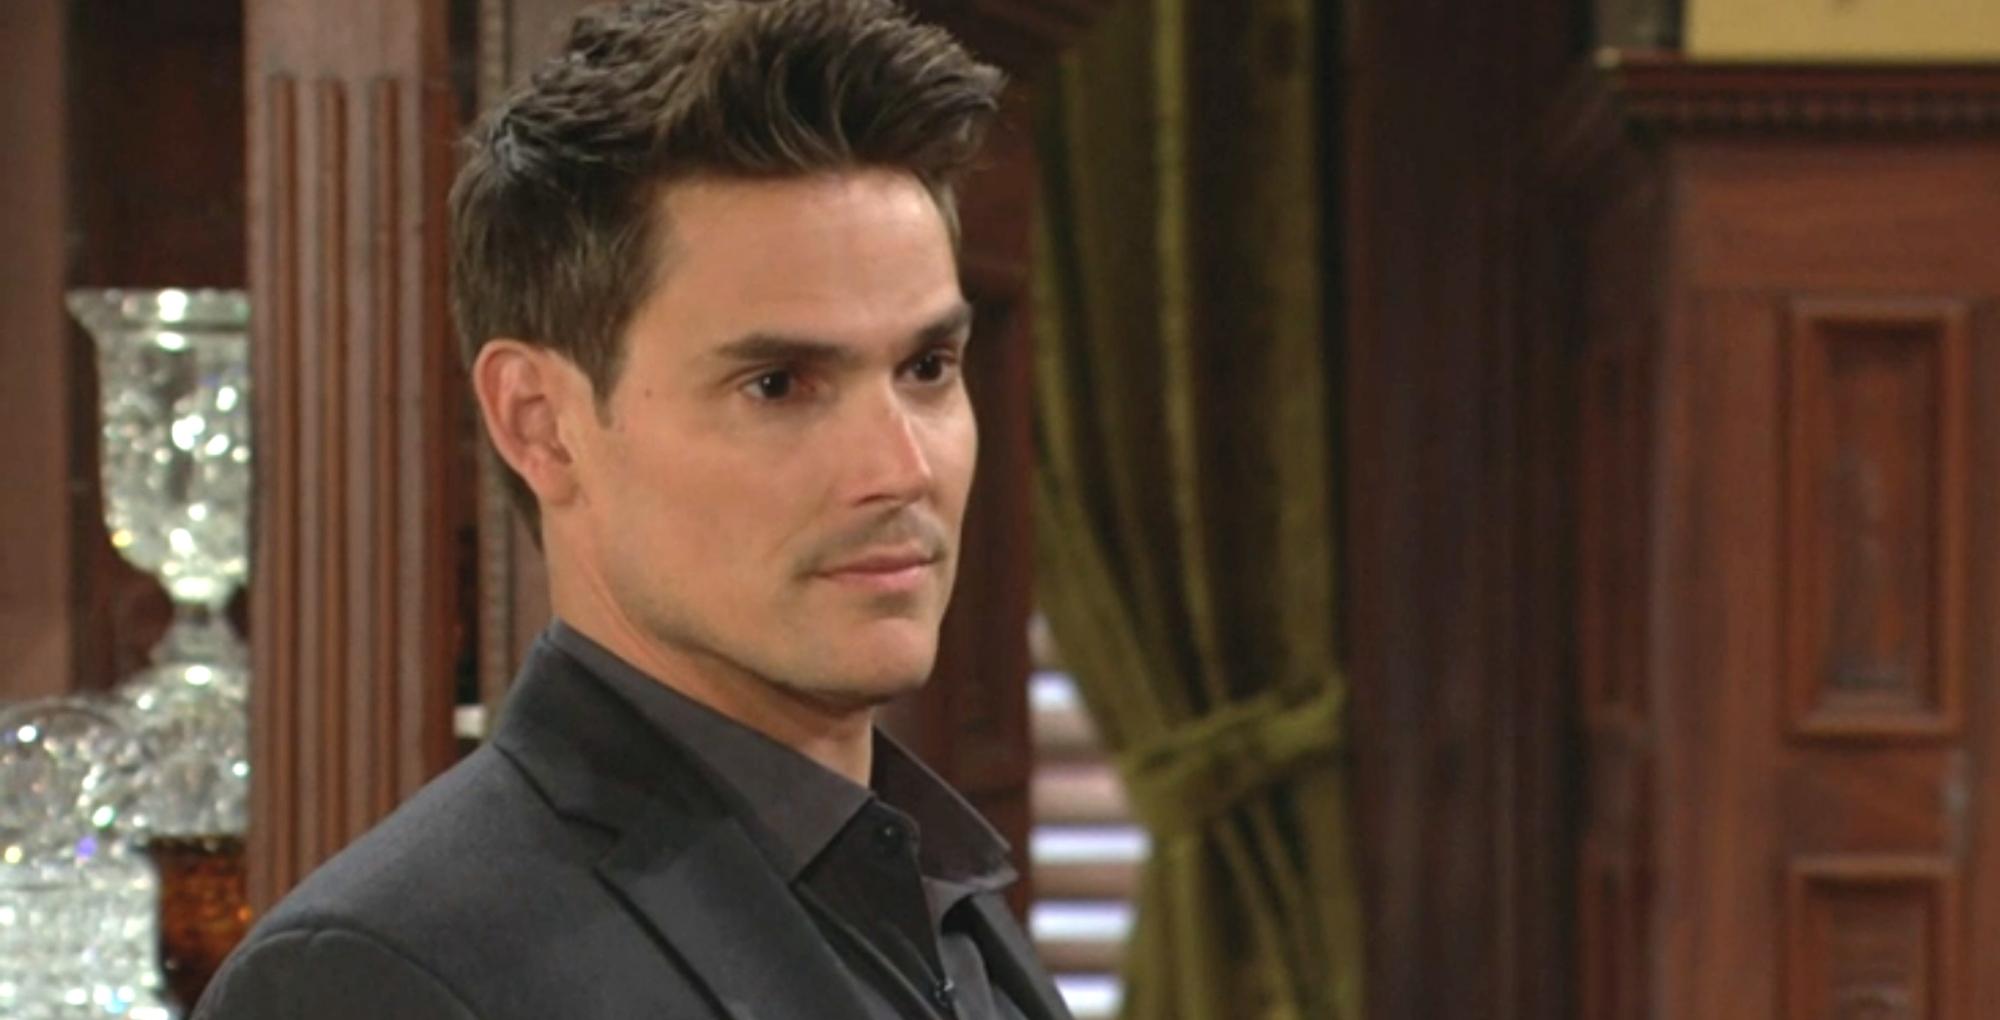 adam newman has some harsh words in the young and the restless recap for june 8, 2023.